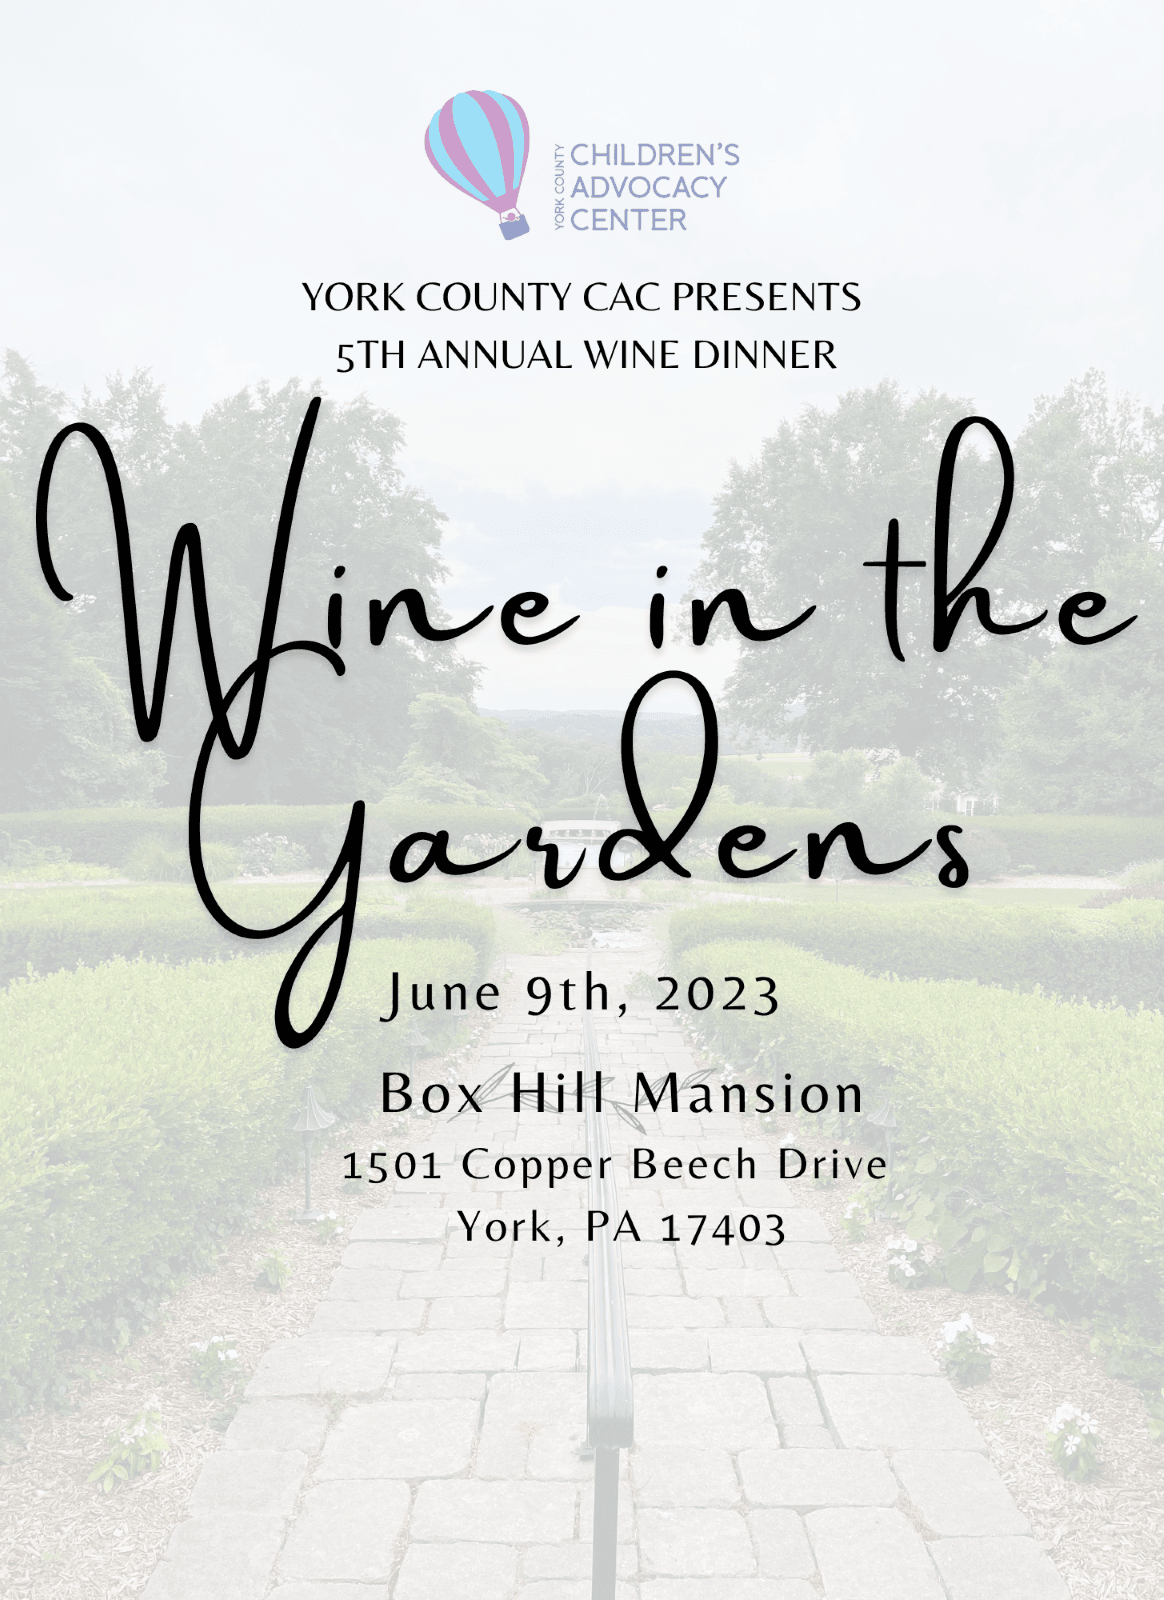 Wine In the Gardens--5th Annual Wine Dinner